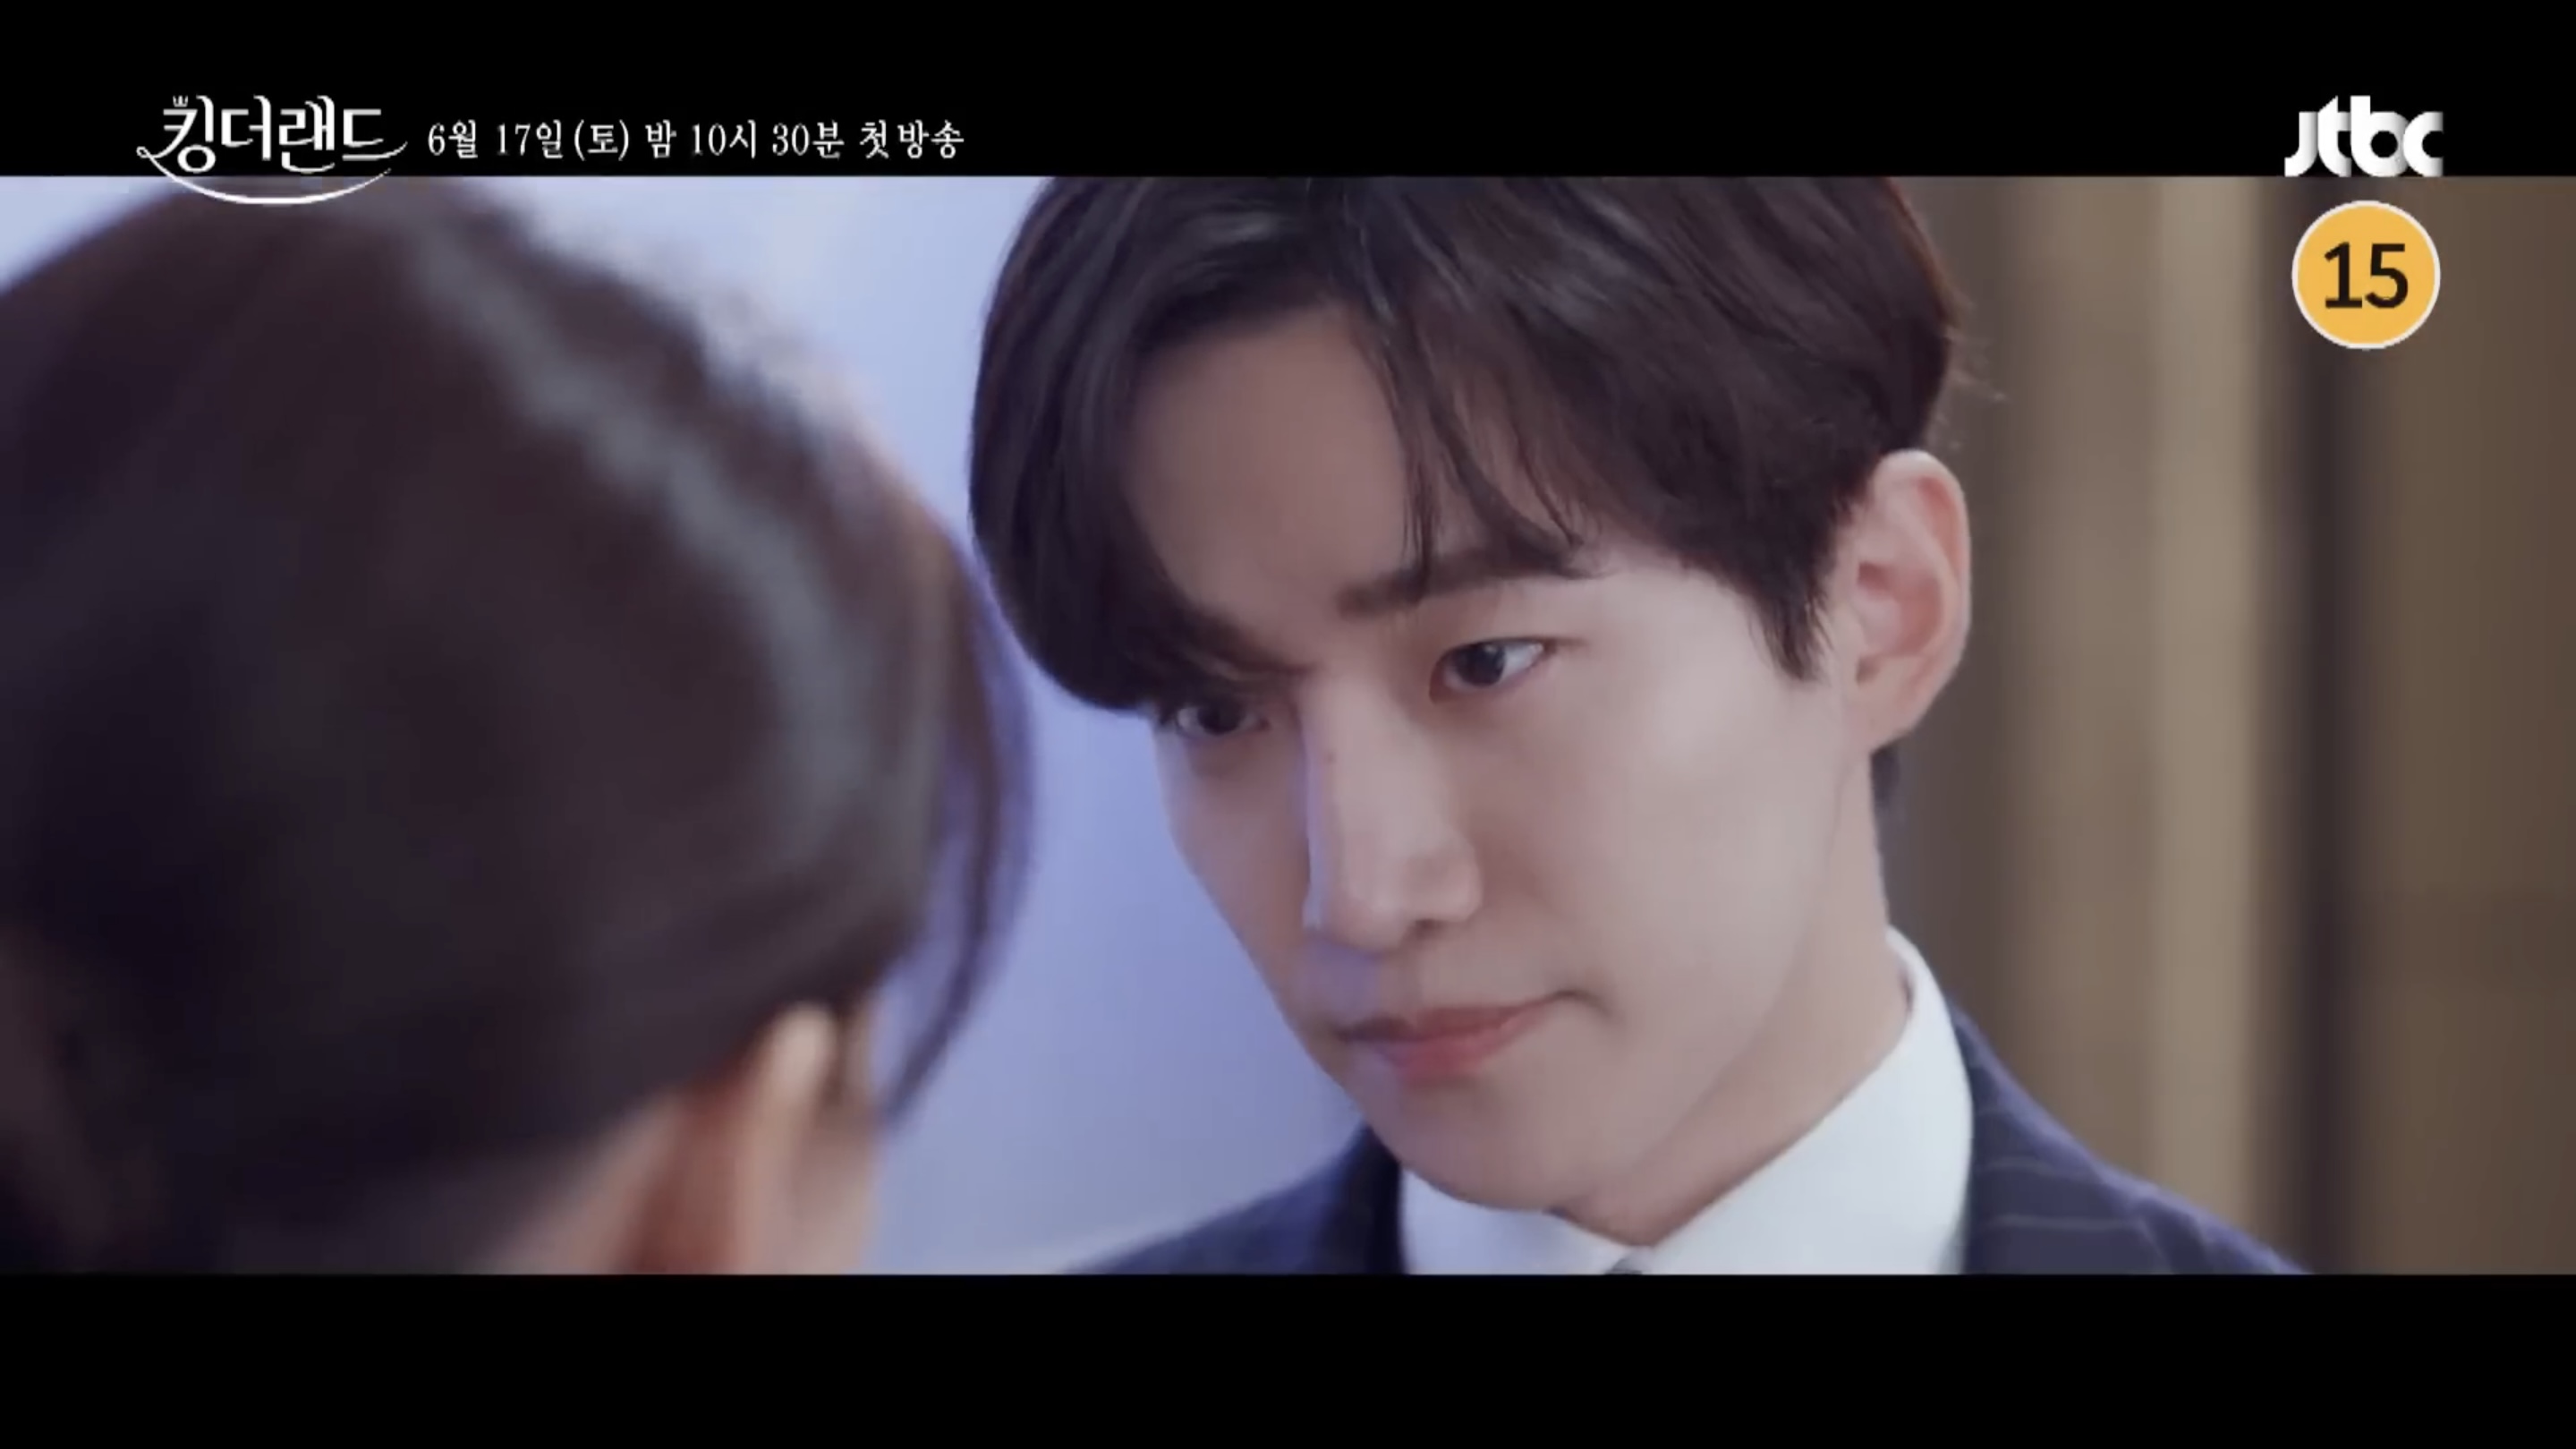 Yoon-ah discovers Junho’s identity in King the Land